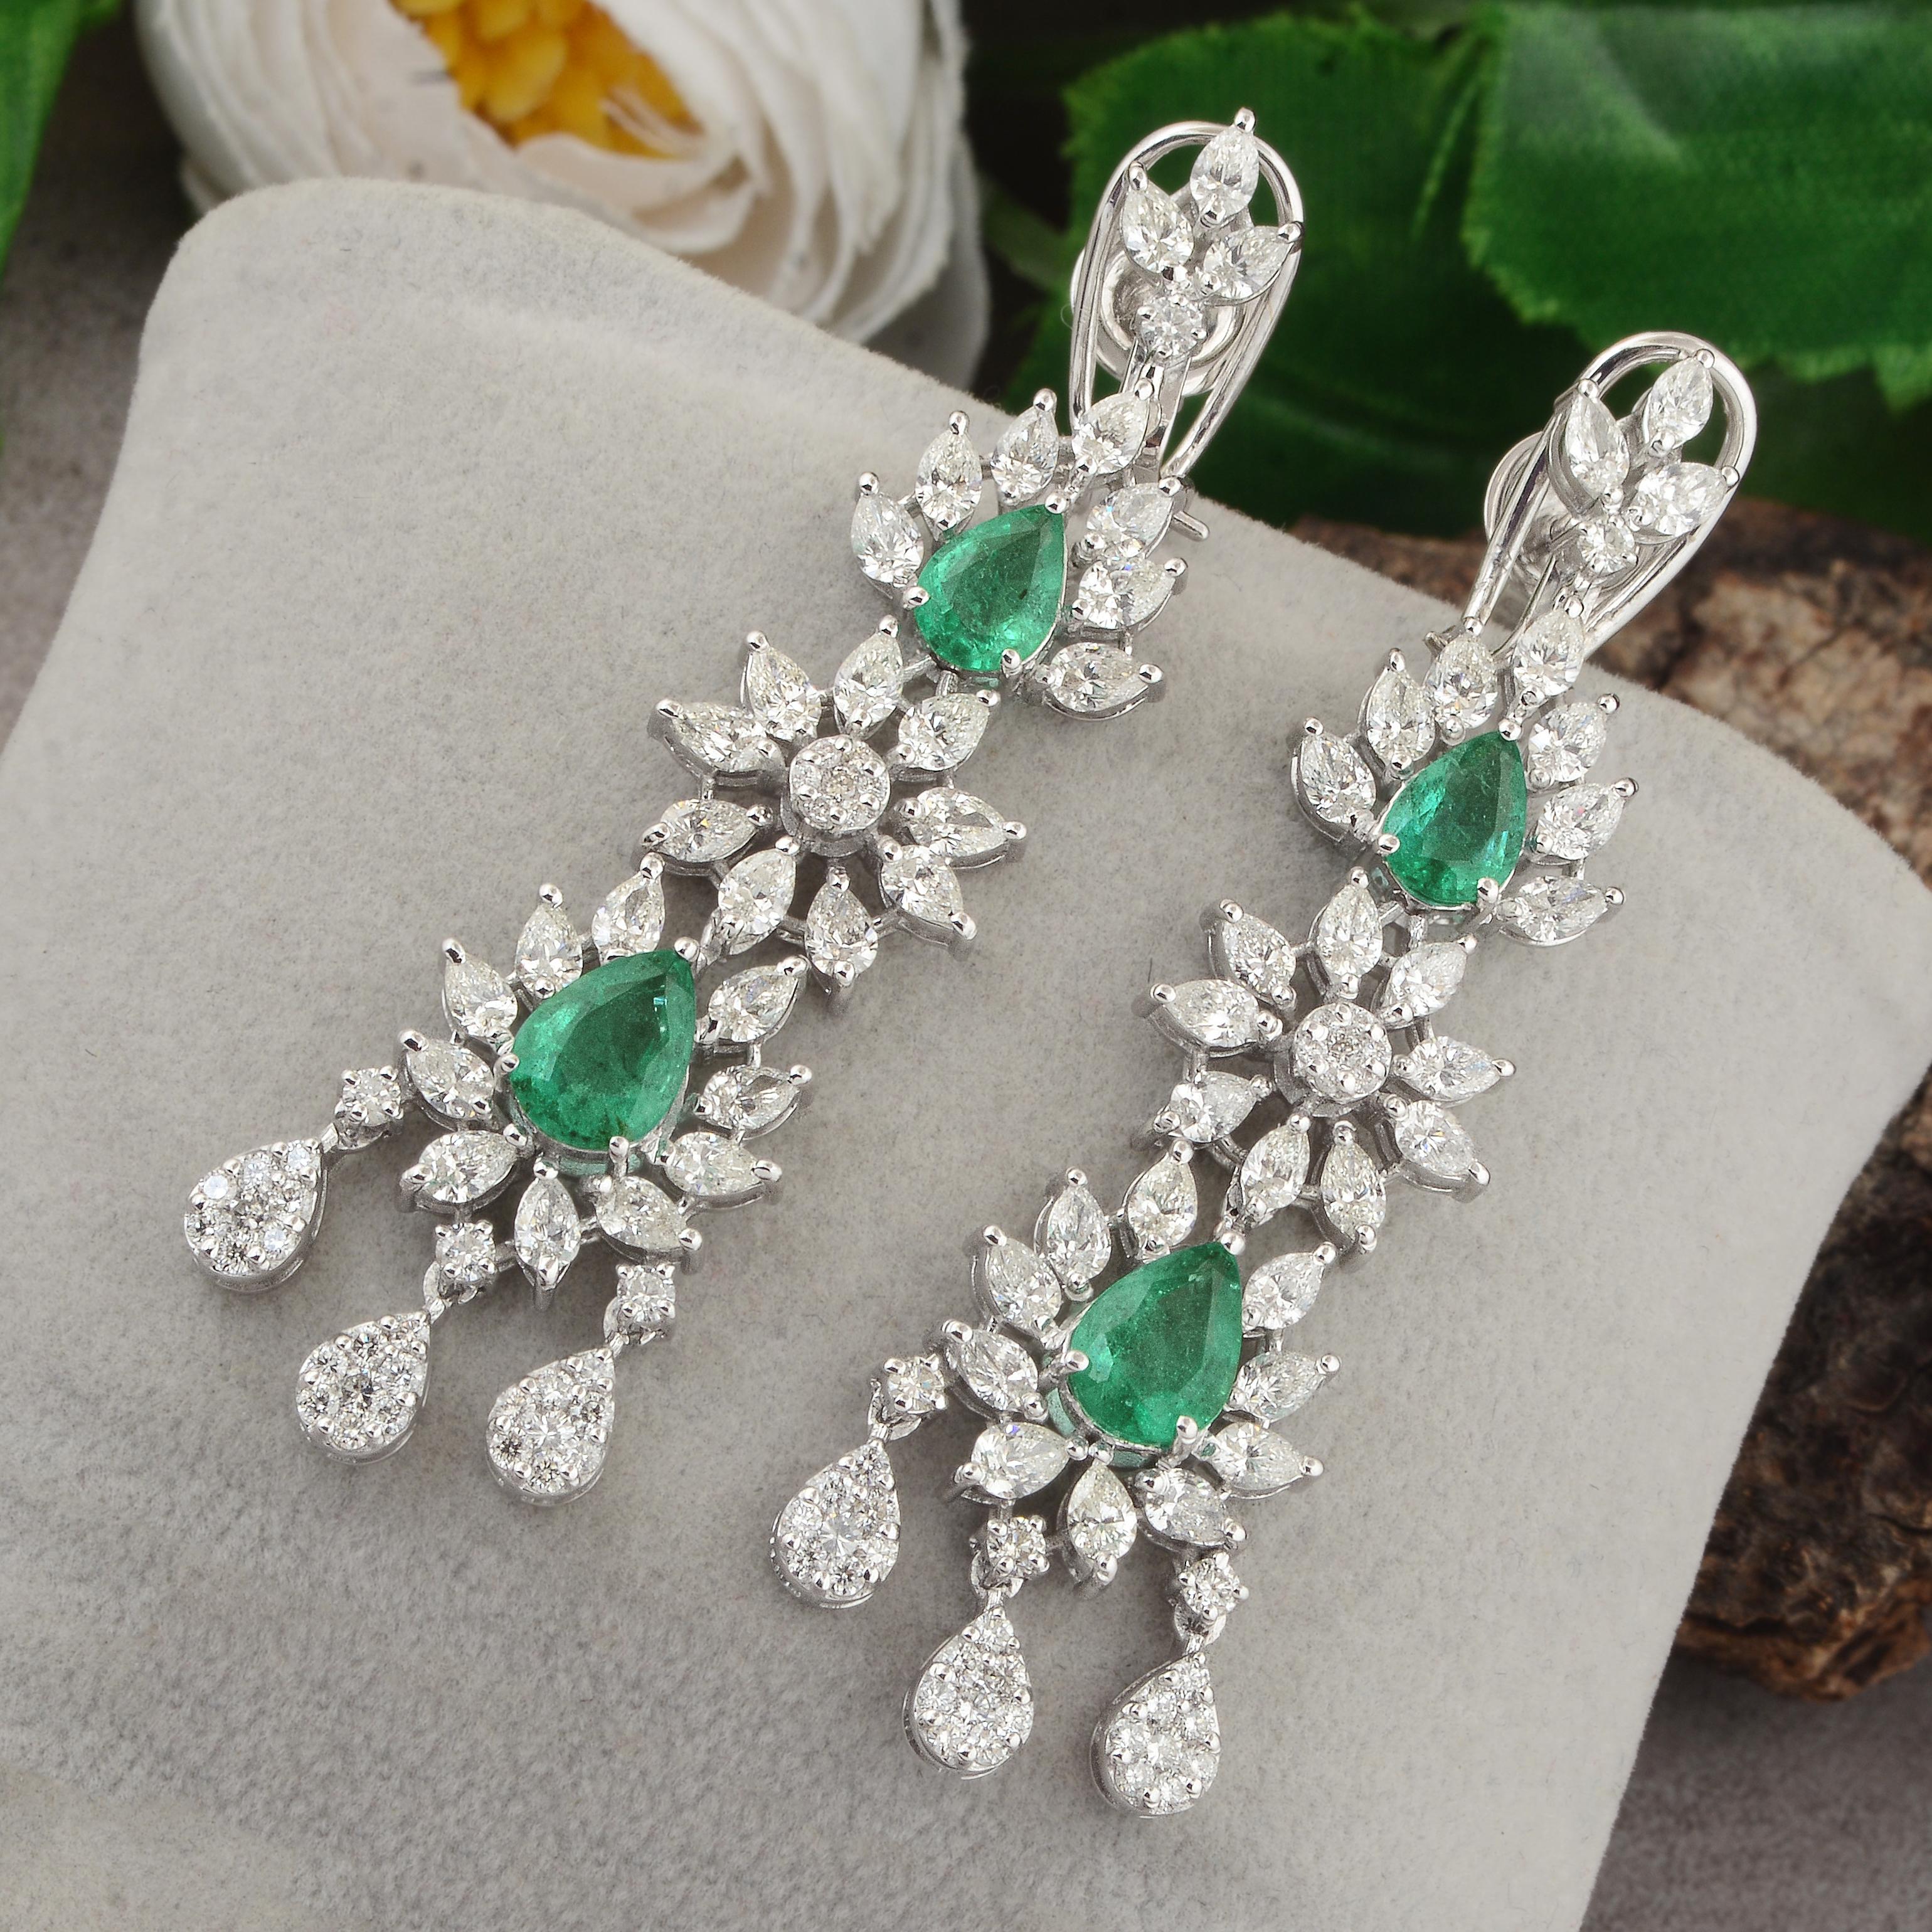 Item Code :- SEE-1980
Gross Wet :- 18.15 gm
18k White Gold Wet :- 16.34 gm
Diamond Wet :- 5.85 ct ( AVERAGE DIAMOND CLARITY SI1-SI2 & COLOR H-I )
Emerald Wet :- 3.18 ct
Earrings Length :- 60 mm approx.
✦ Sizing
.....................
We can adjust